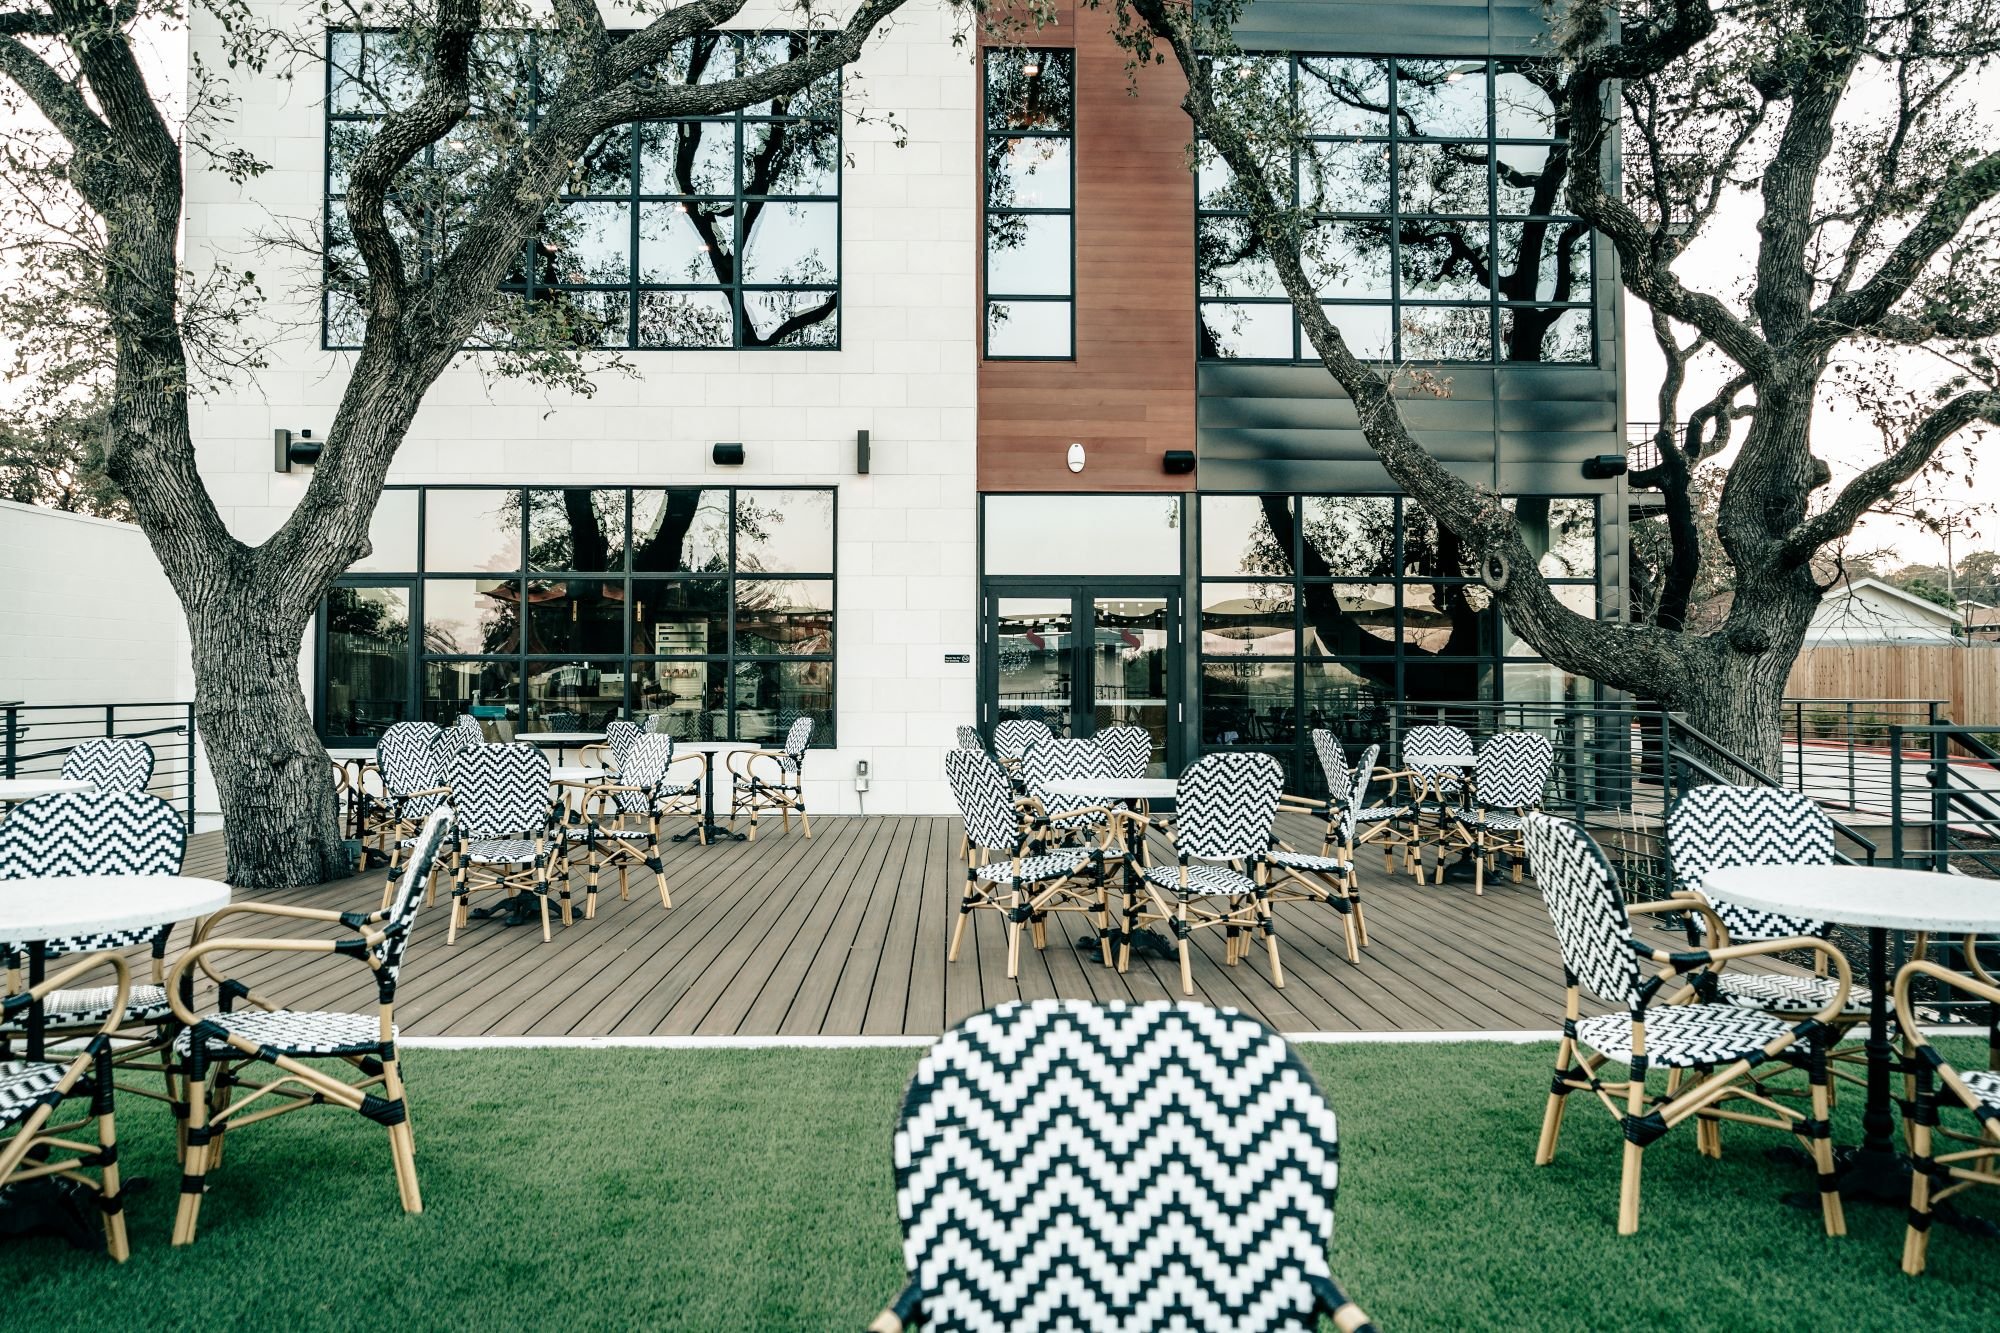 How did our beautiful Patio Deck, Lawn, and Pool come to be? Read all about the creation of our outdoor oasis in the April edition of @landscapeasn. 

Link to the story is in our bio! 

📸: @a_yum_a 

#lasn #landscape #hotellandscapes #hoteldesign #h